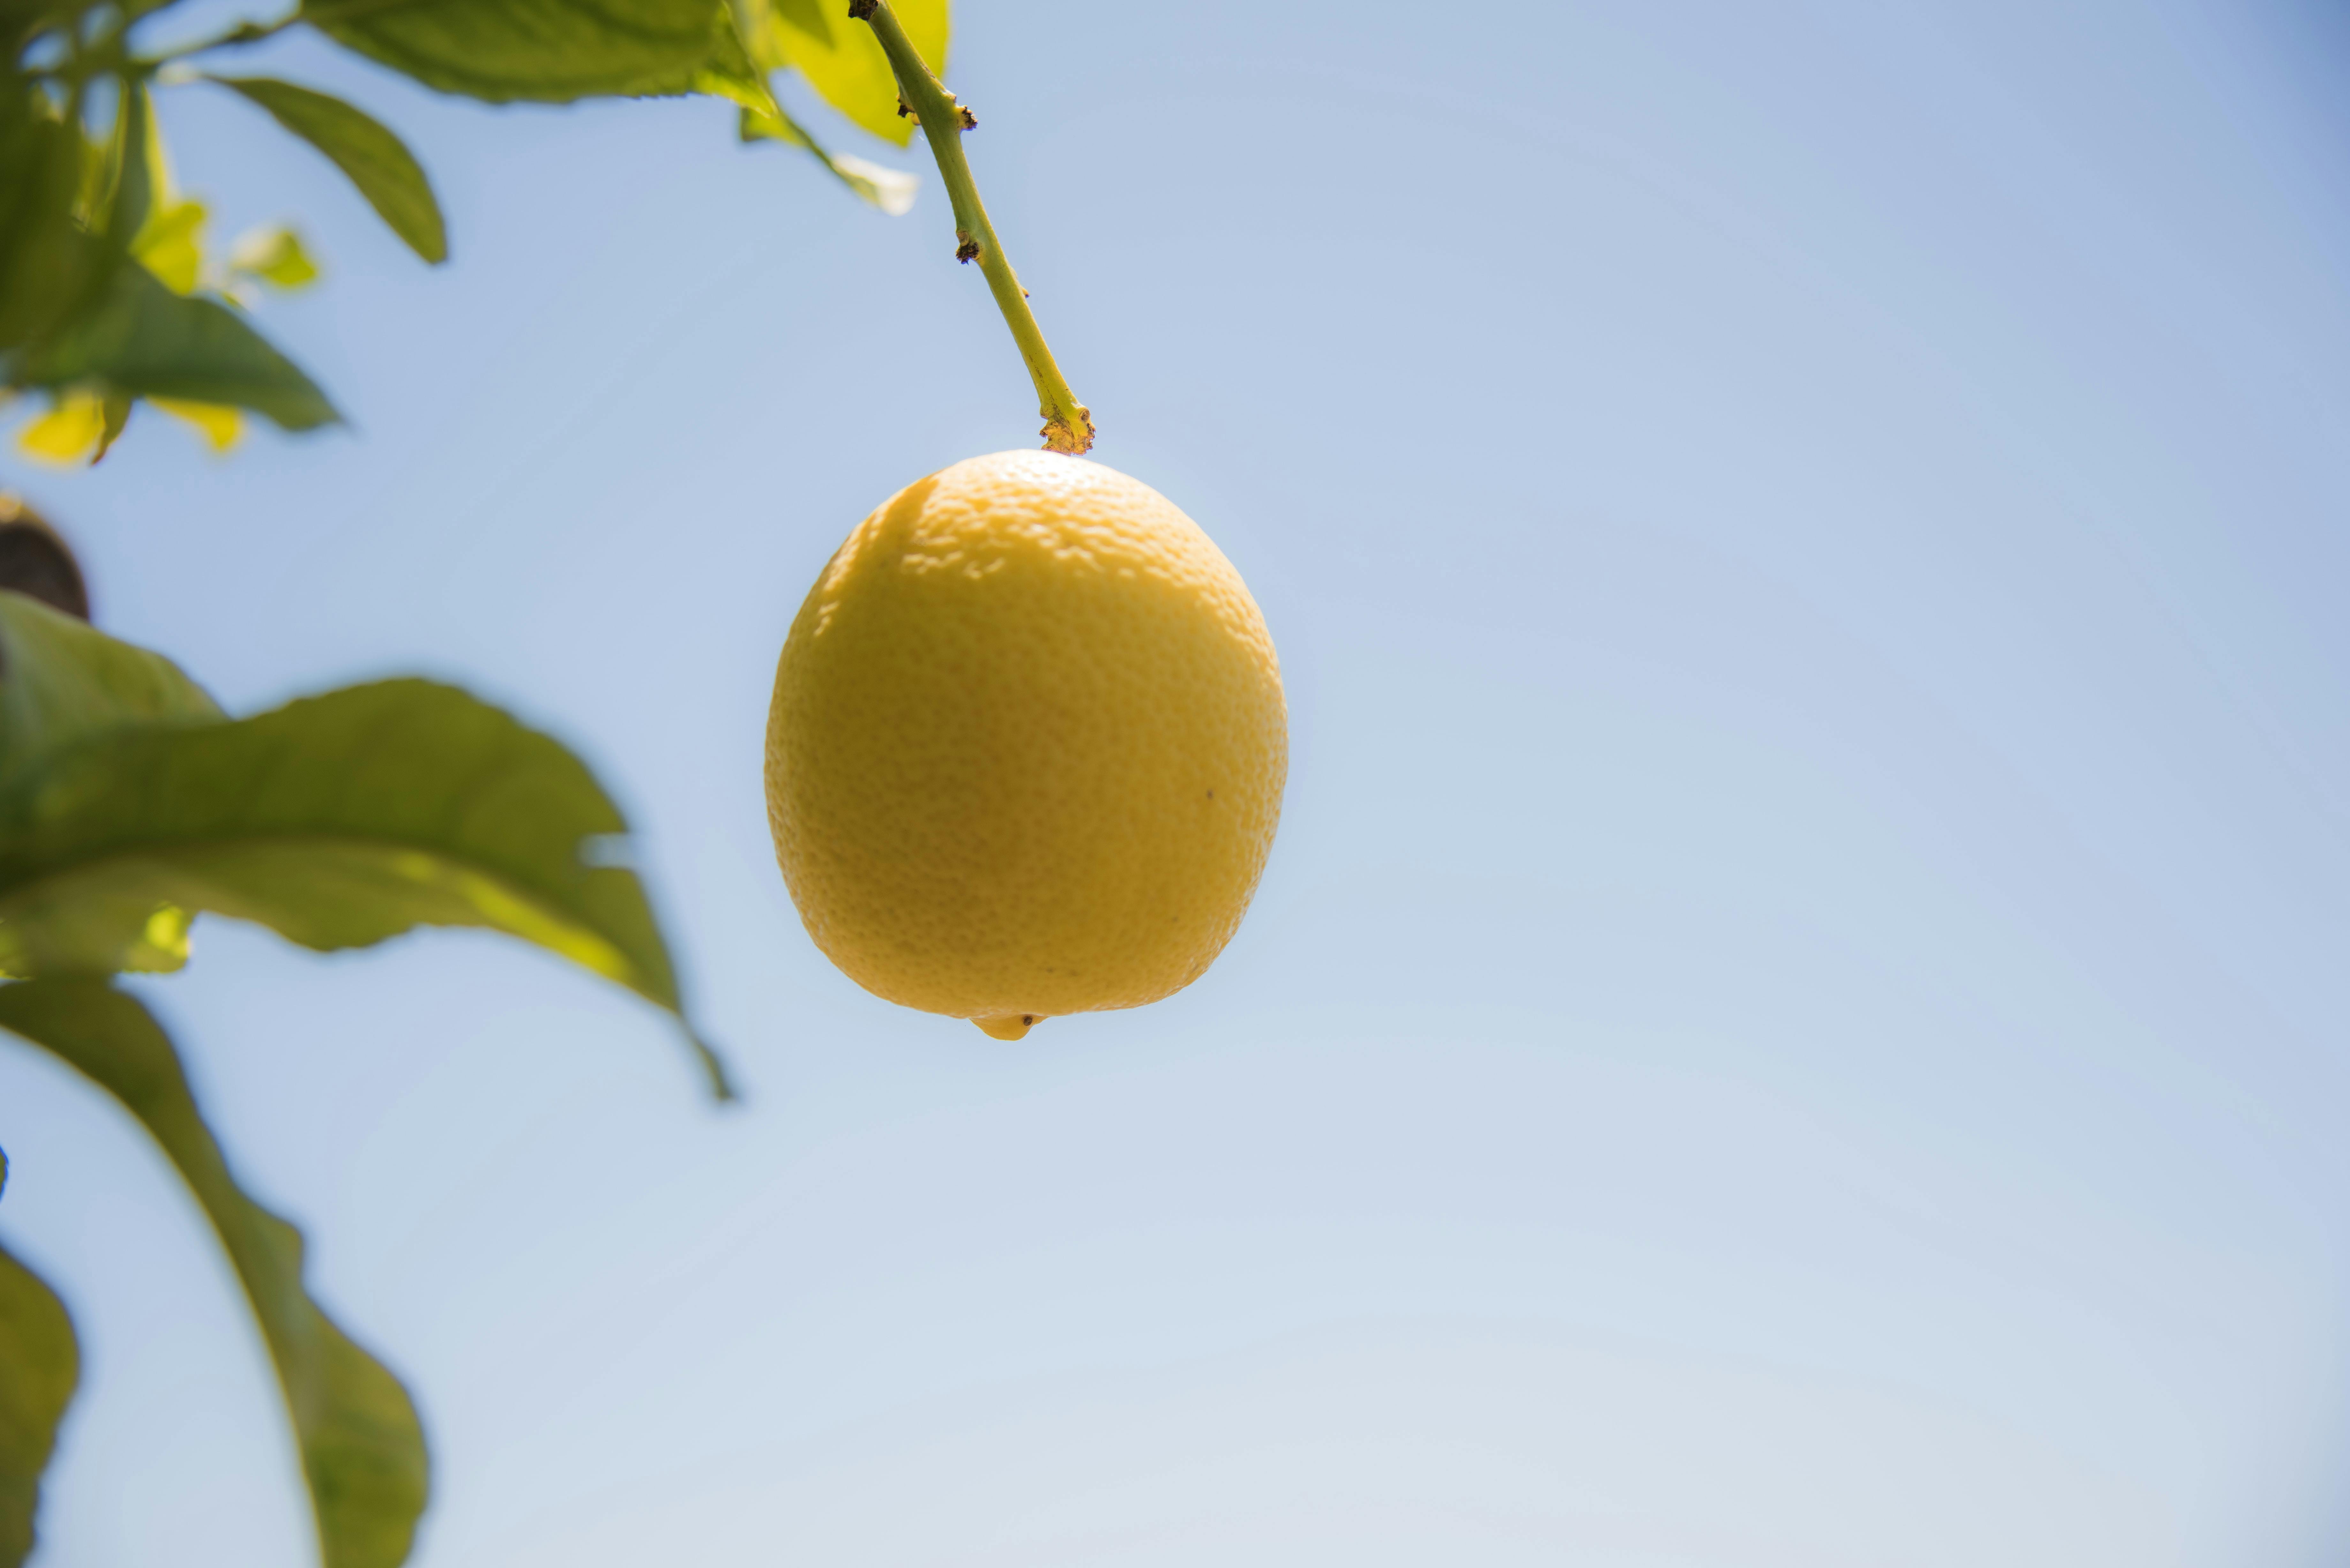 Lemon trees are heavy feeders and may need supplemental fertiziler